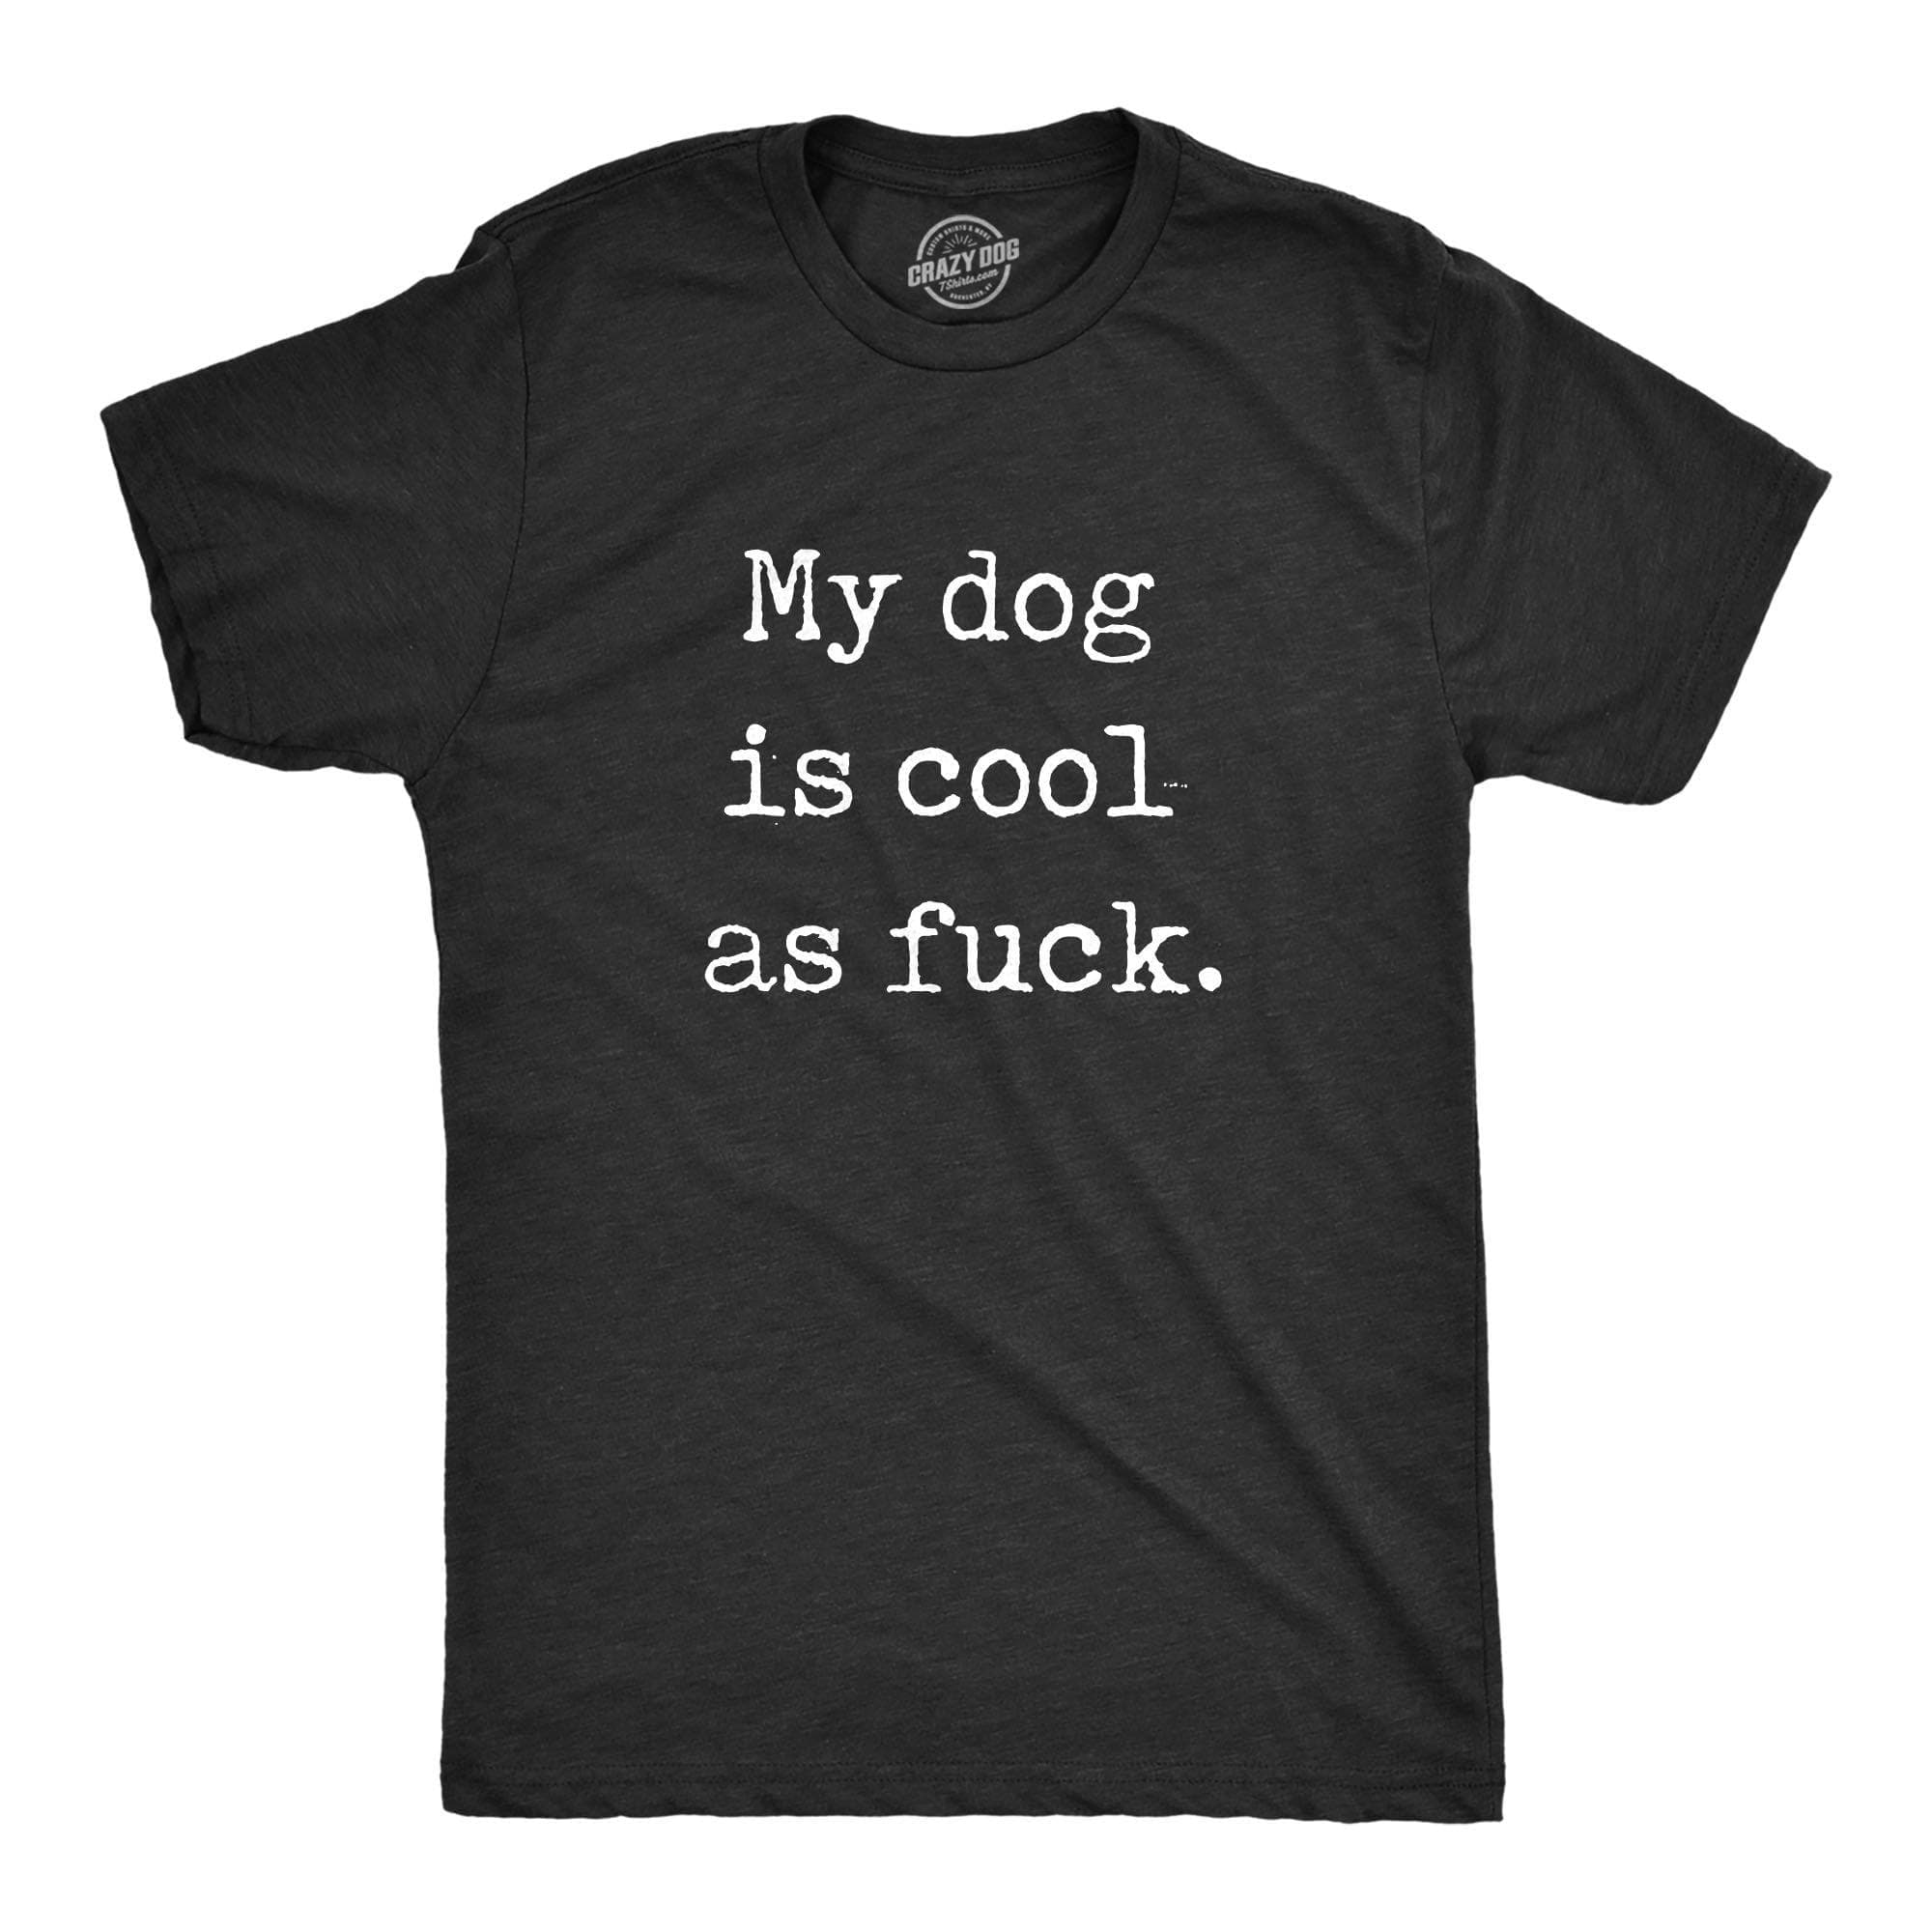 My Dog Is Cool As Fuck Men's Tshirt - Crazy Dog T-Shirts